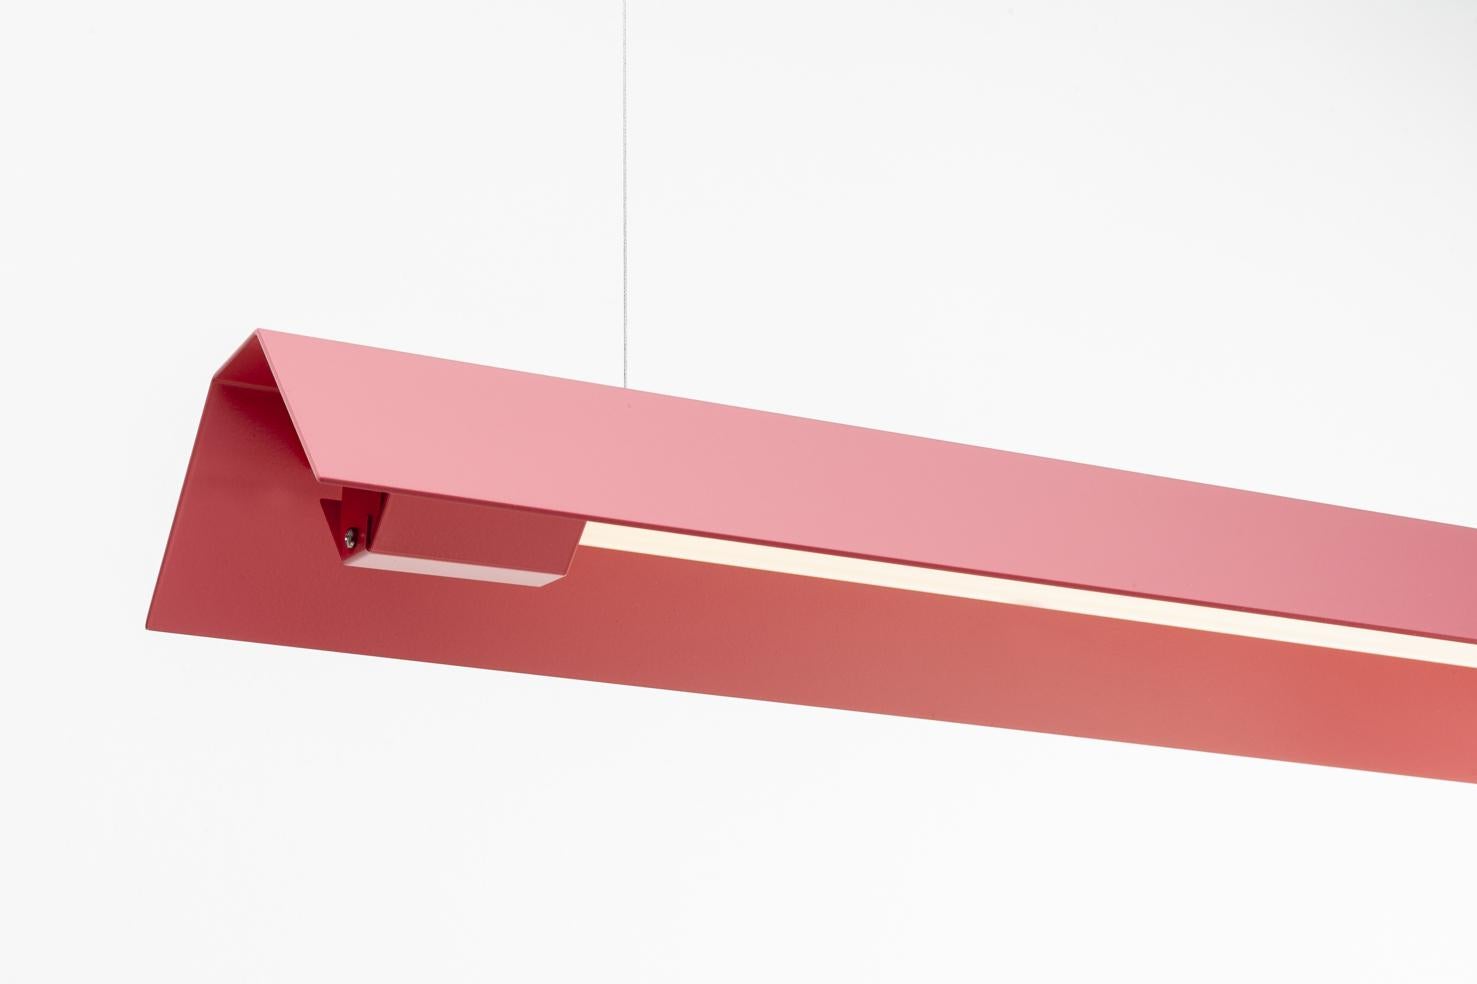 Medium Misalliance ral antique pink suspended light by Lexavala.
Dimensions: D 16 x W 100 x H 8 cm.
Materials: powder coated aluminium.

There are two lenghts of socket covers, extending over the LED. Two short are to be found in Suspended and